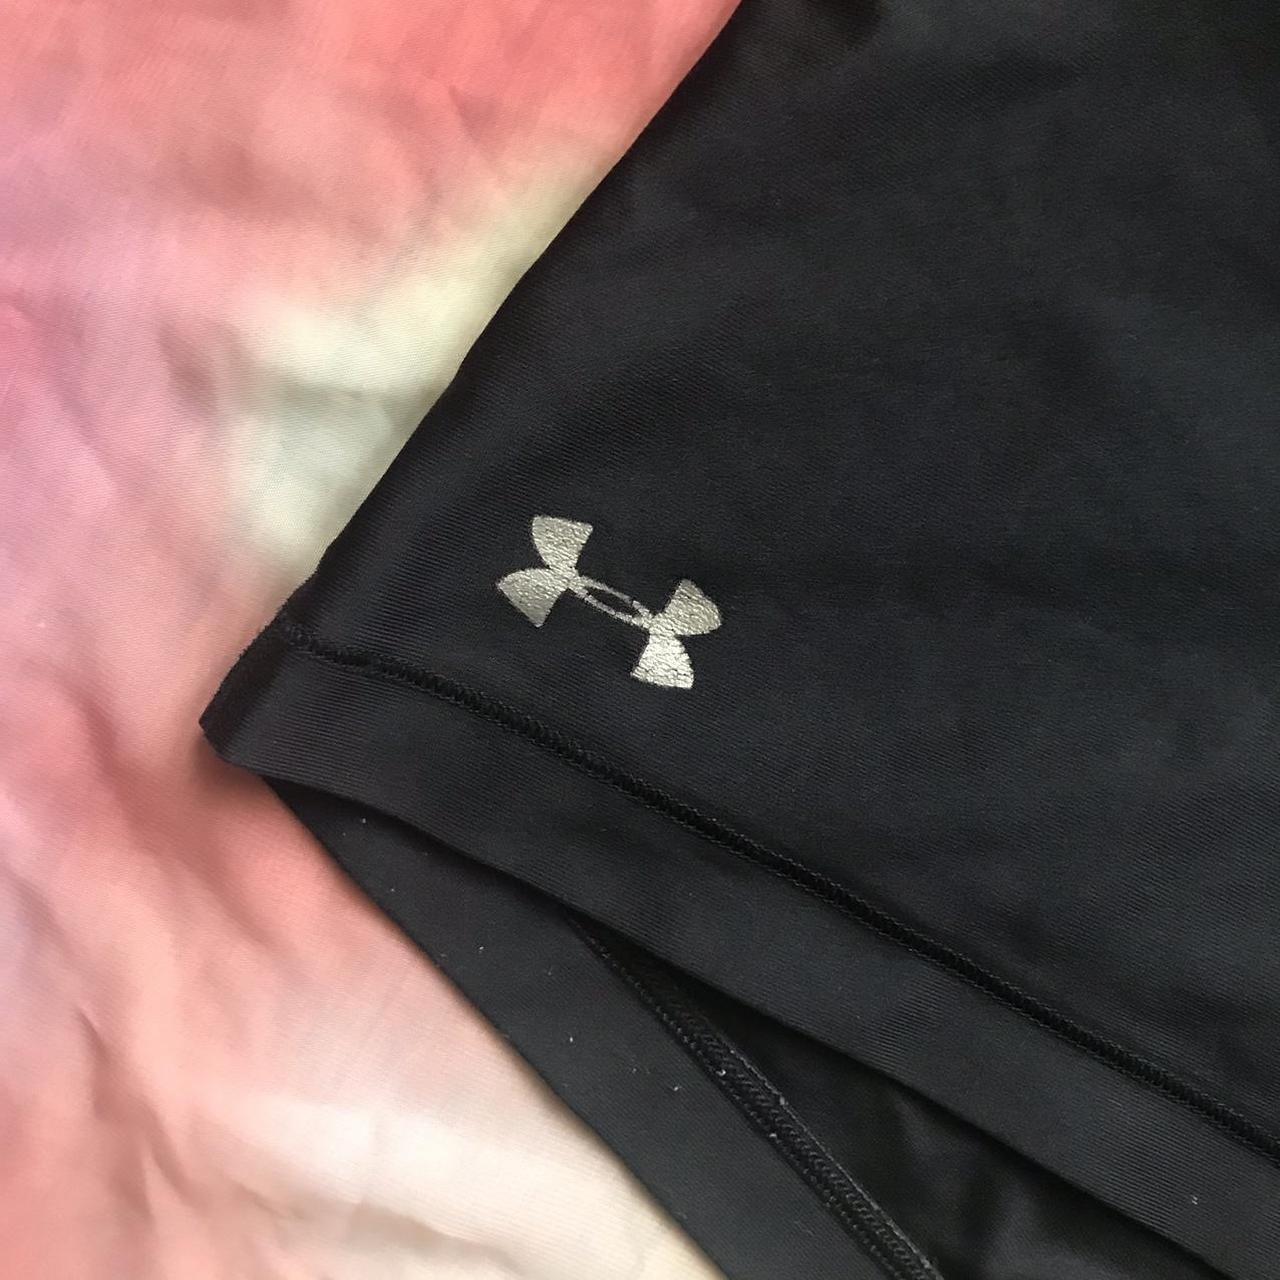 Product Image 2 - Under Armour Black Shorts 🖤

No